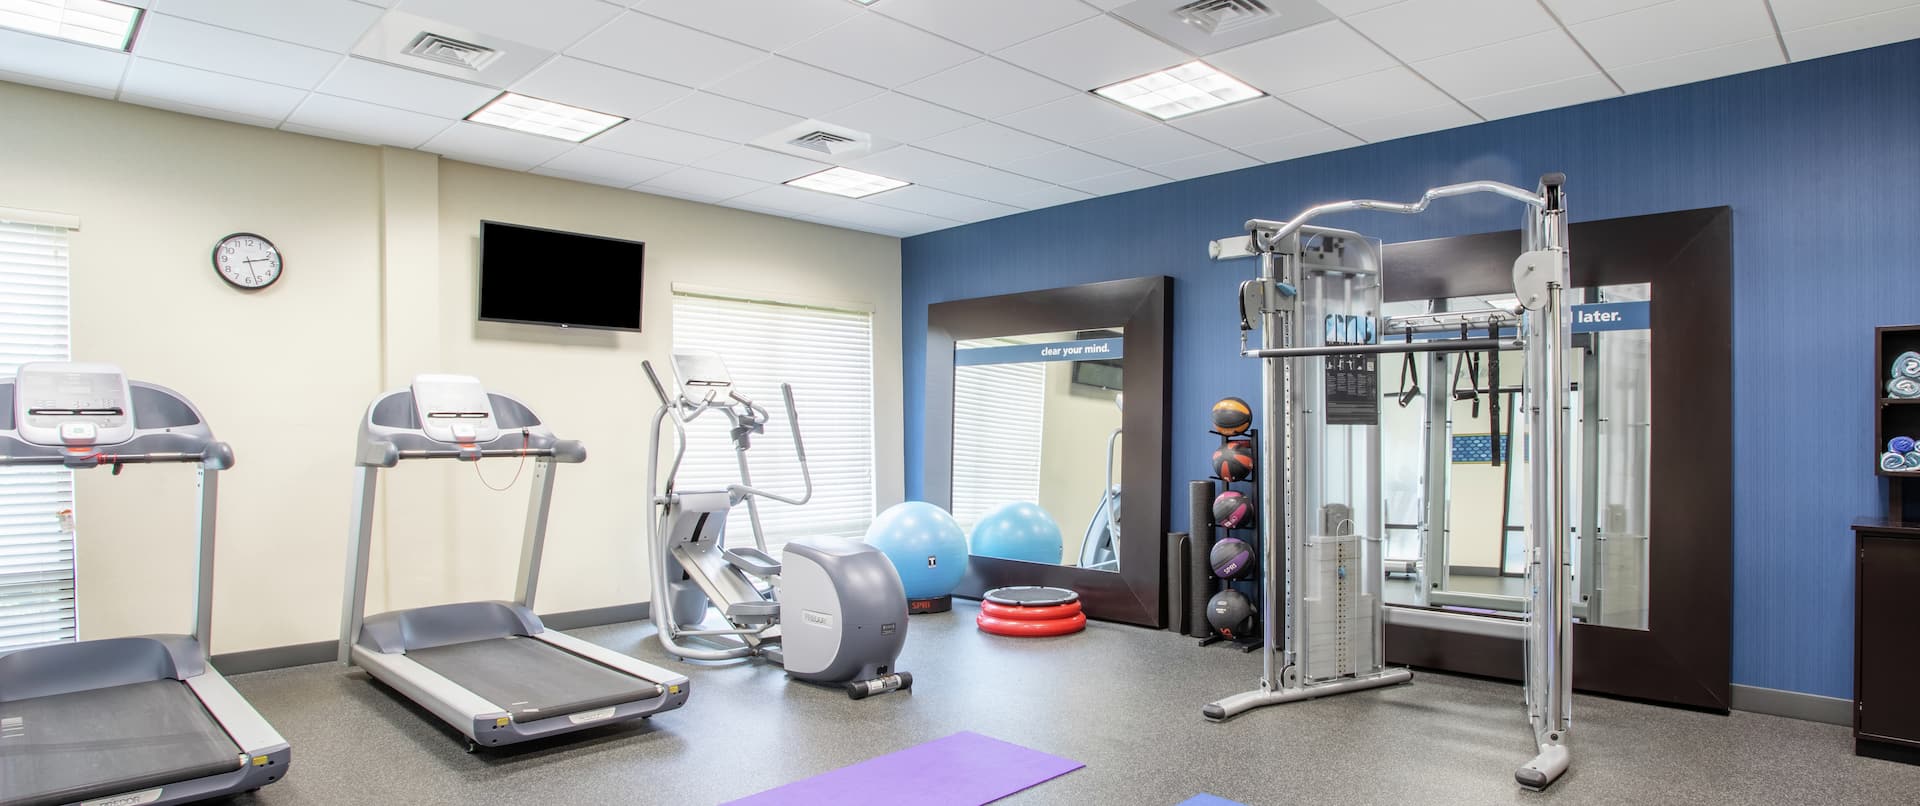 Fitness Center with Treadmills Recumbent Bike and Exercise Balls